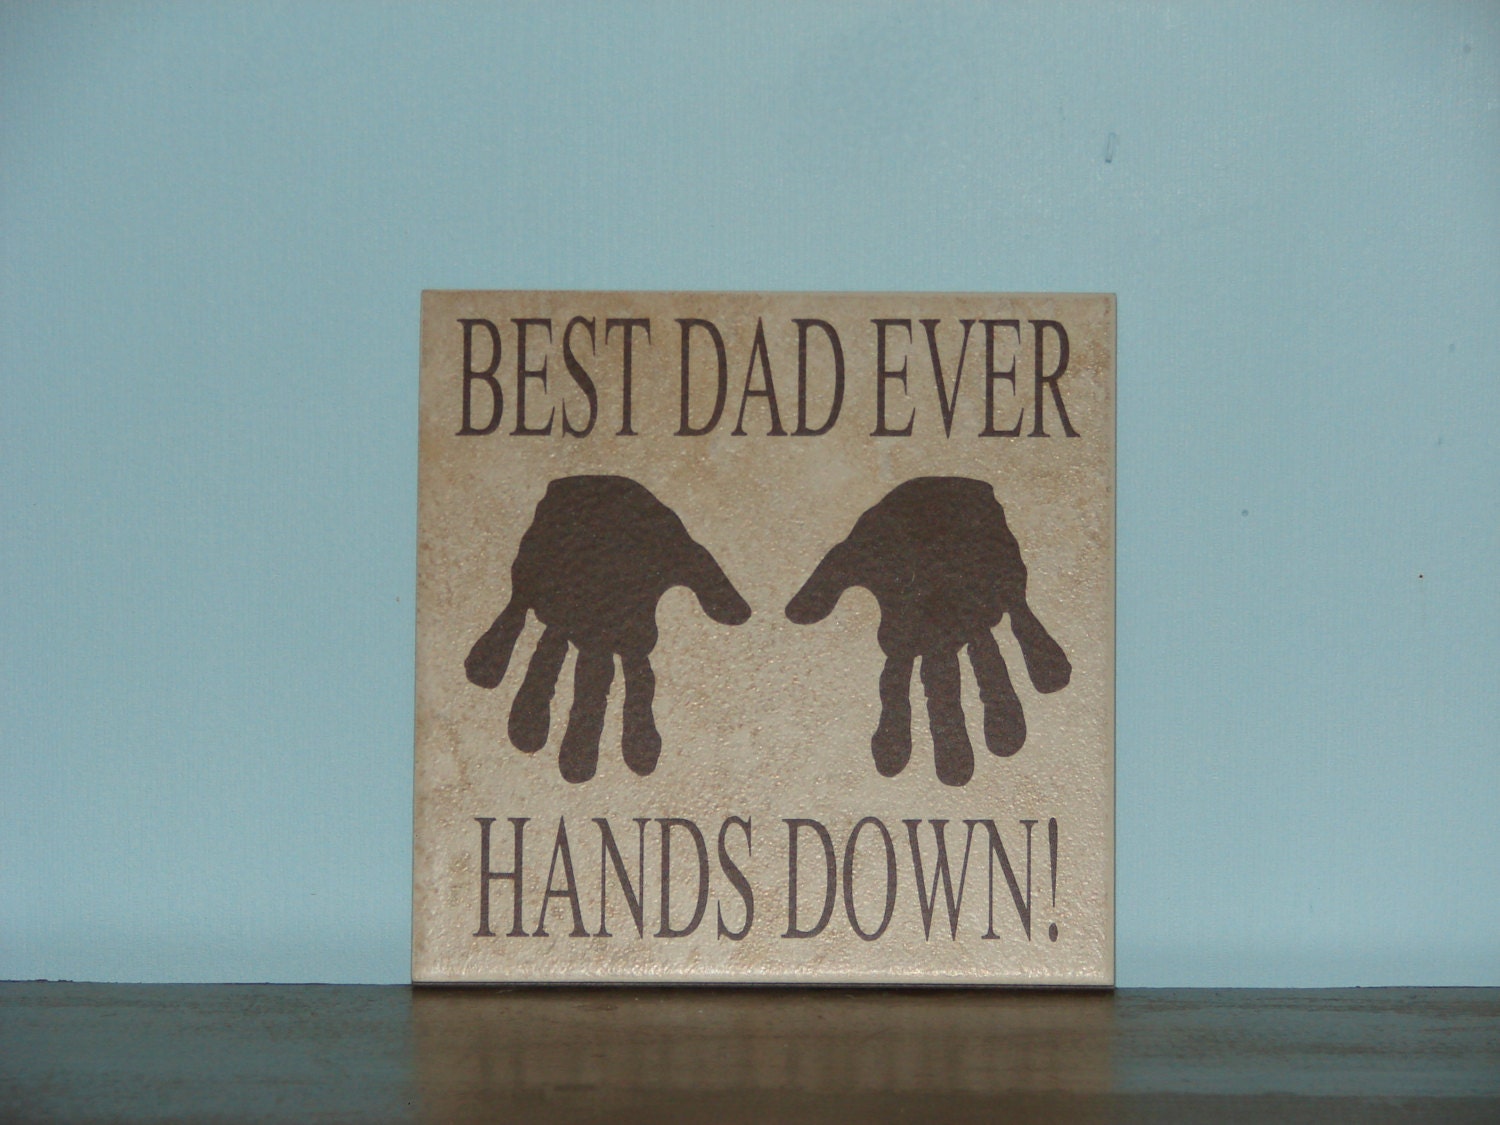 Best Dad Ever Hands Down Decorative Tile With Vinyl Words And